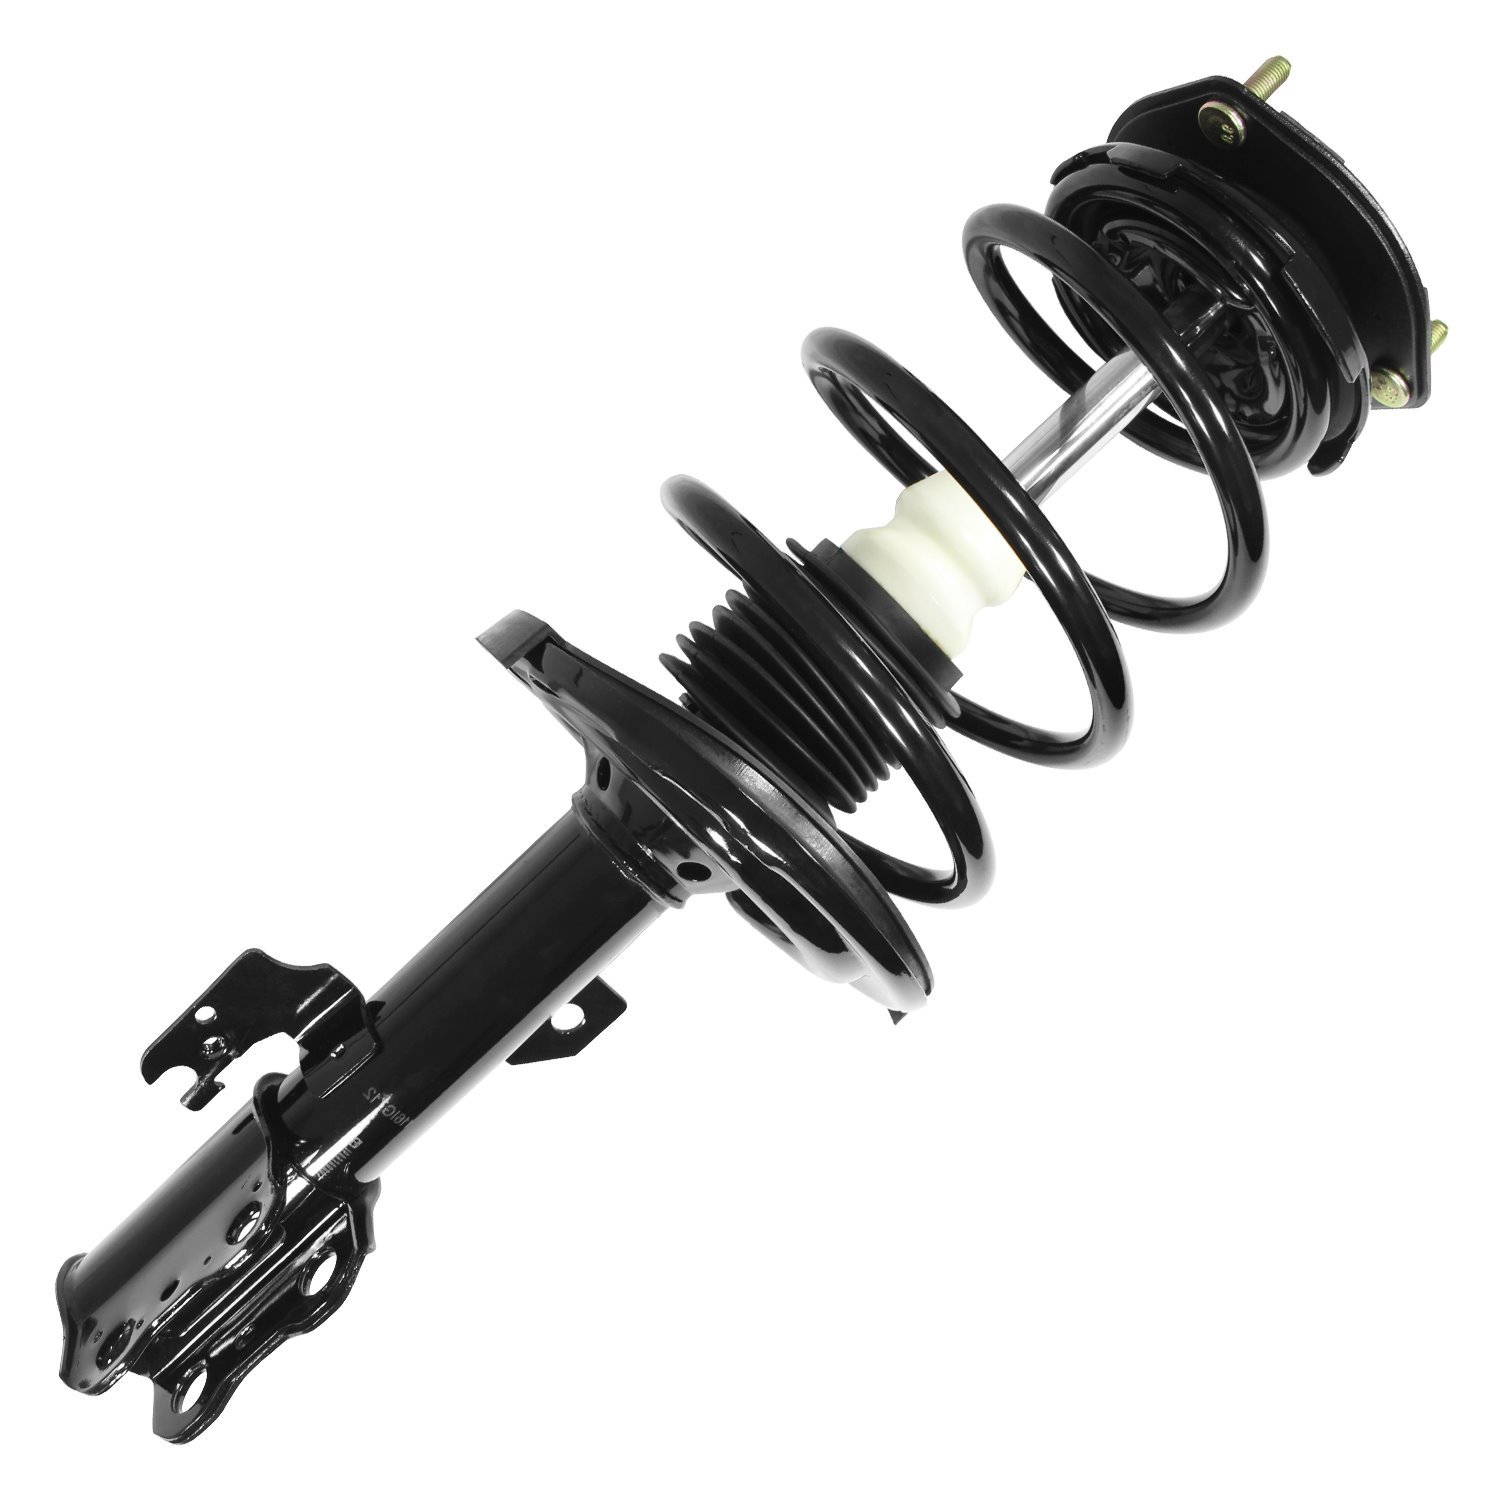 11711 Suspension Strut & Coil Spring Assembly Fits Select Lexus ES330, Toyota Camry, Toyota Solara